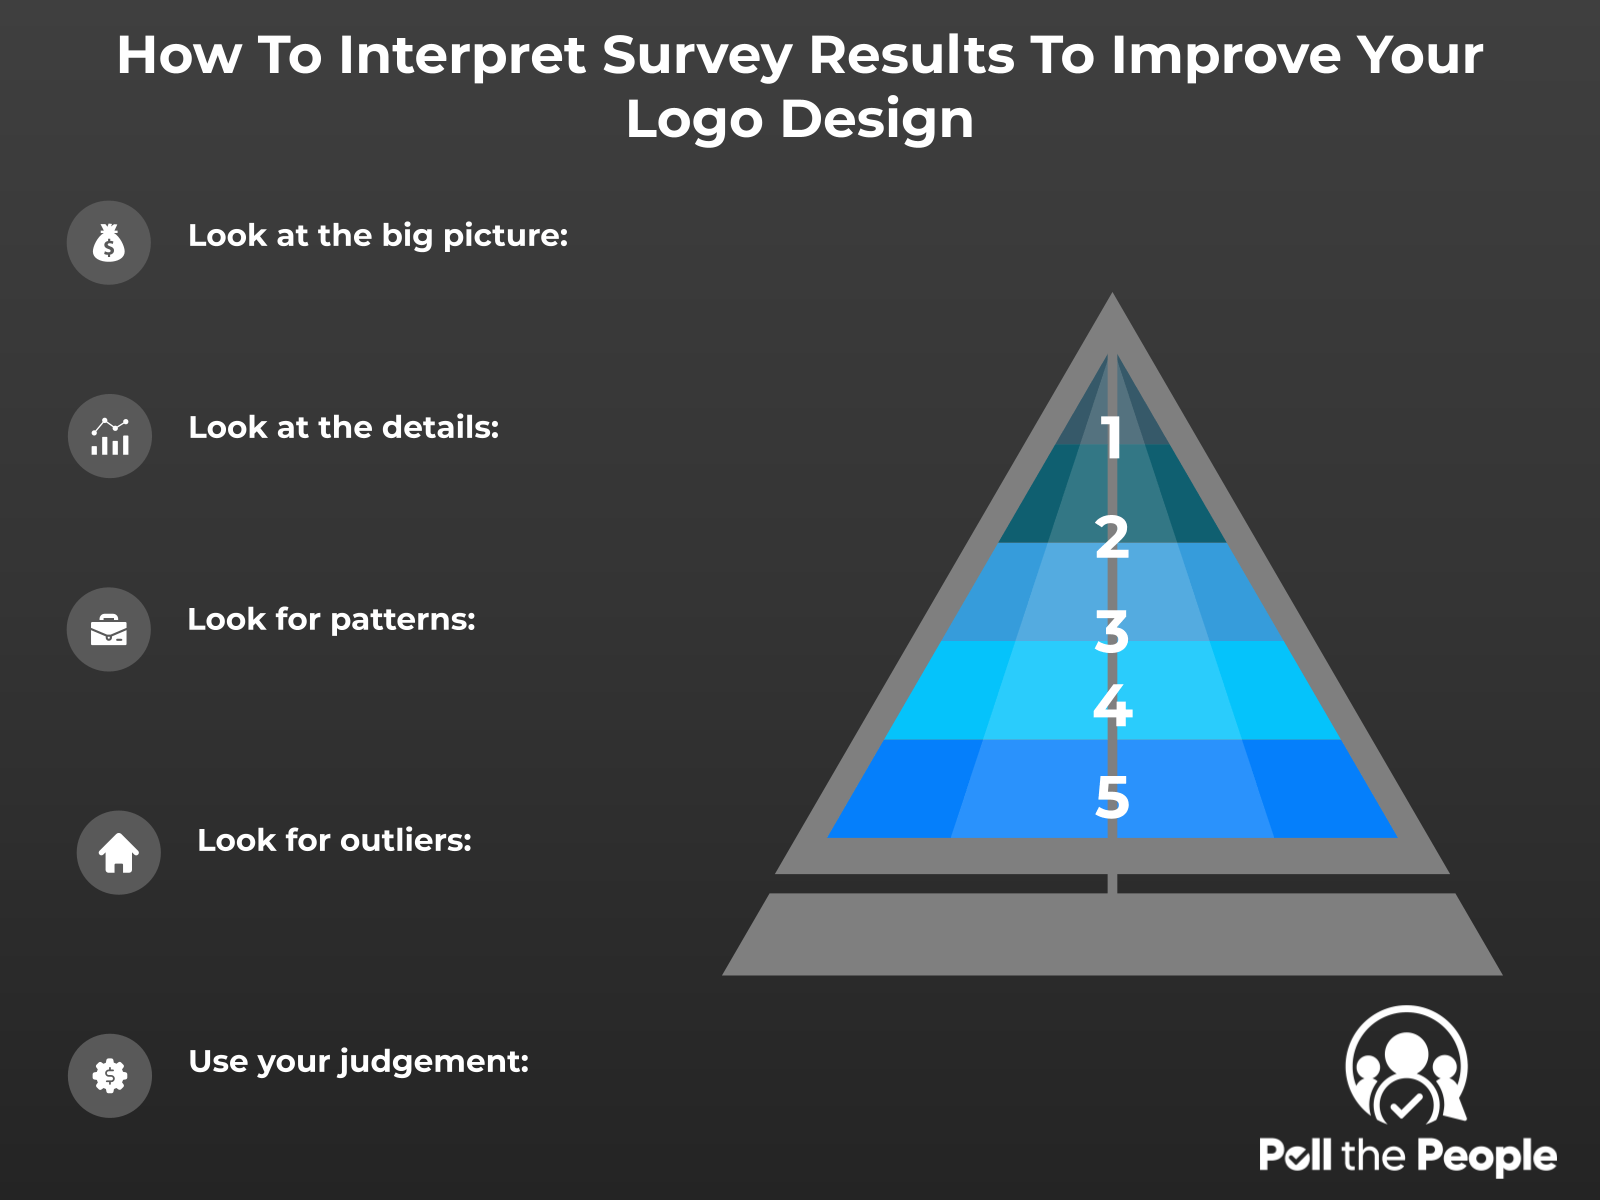 INFOGRAPHIC: How to interpret survey results to improve your logo design - Poll the People